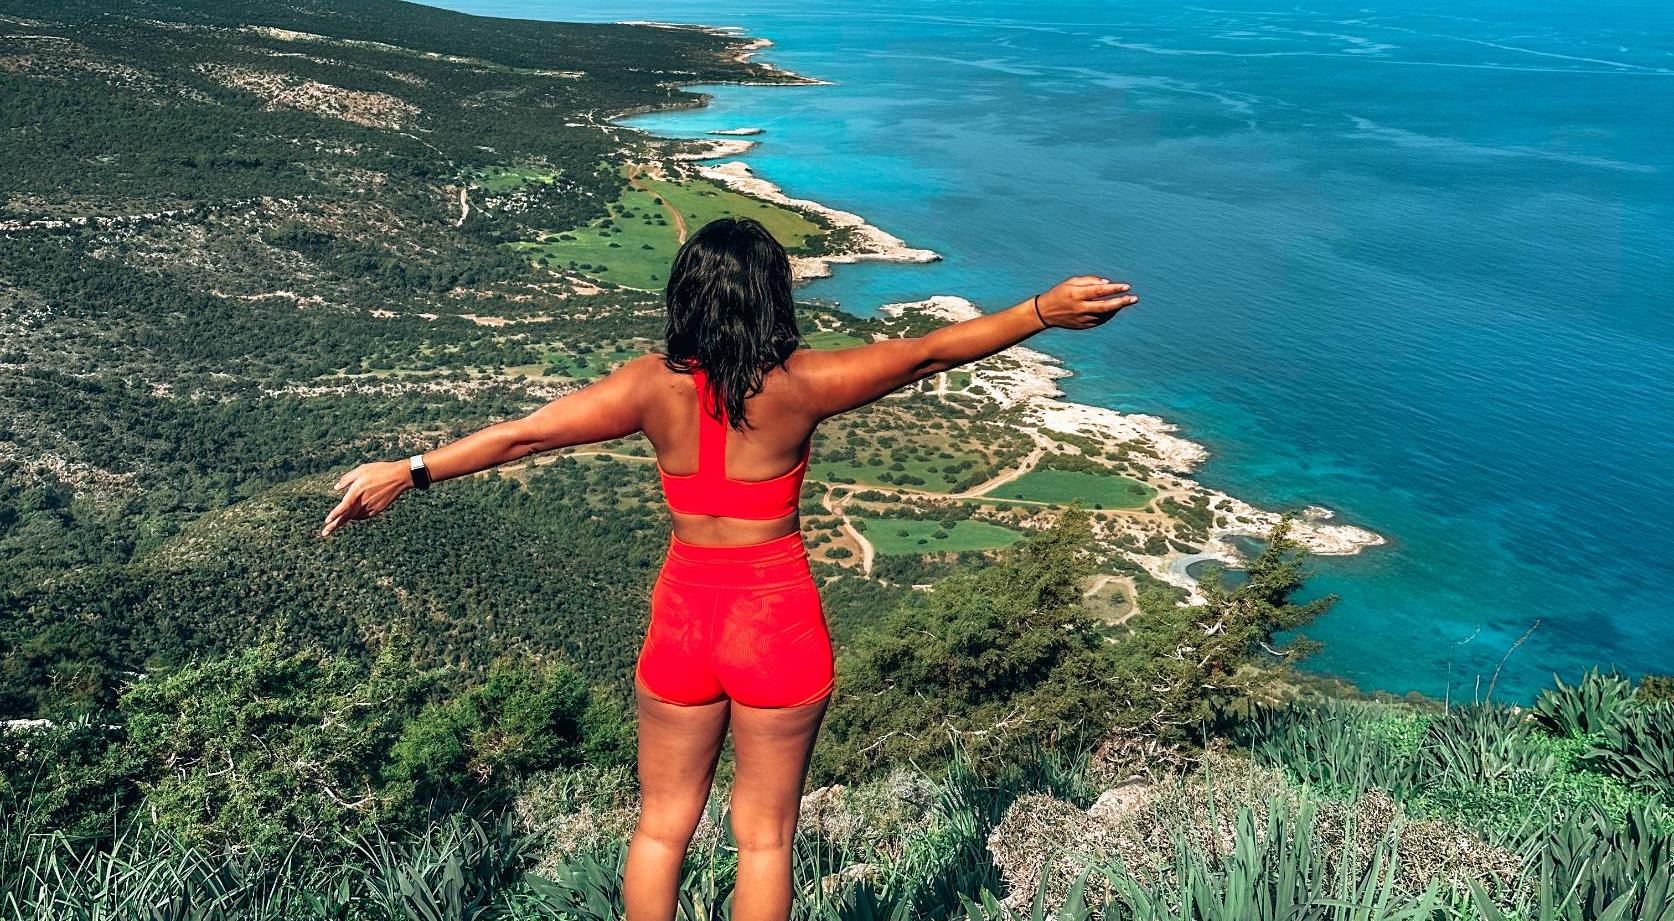 How Solo Travel Opened My Eyes to a New Way of Living